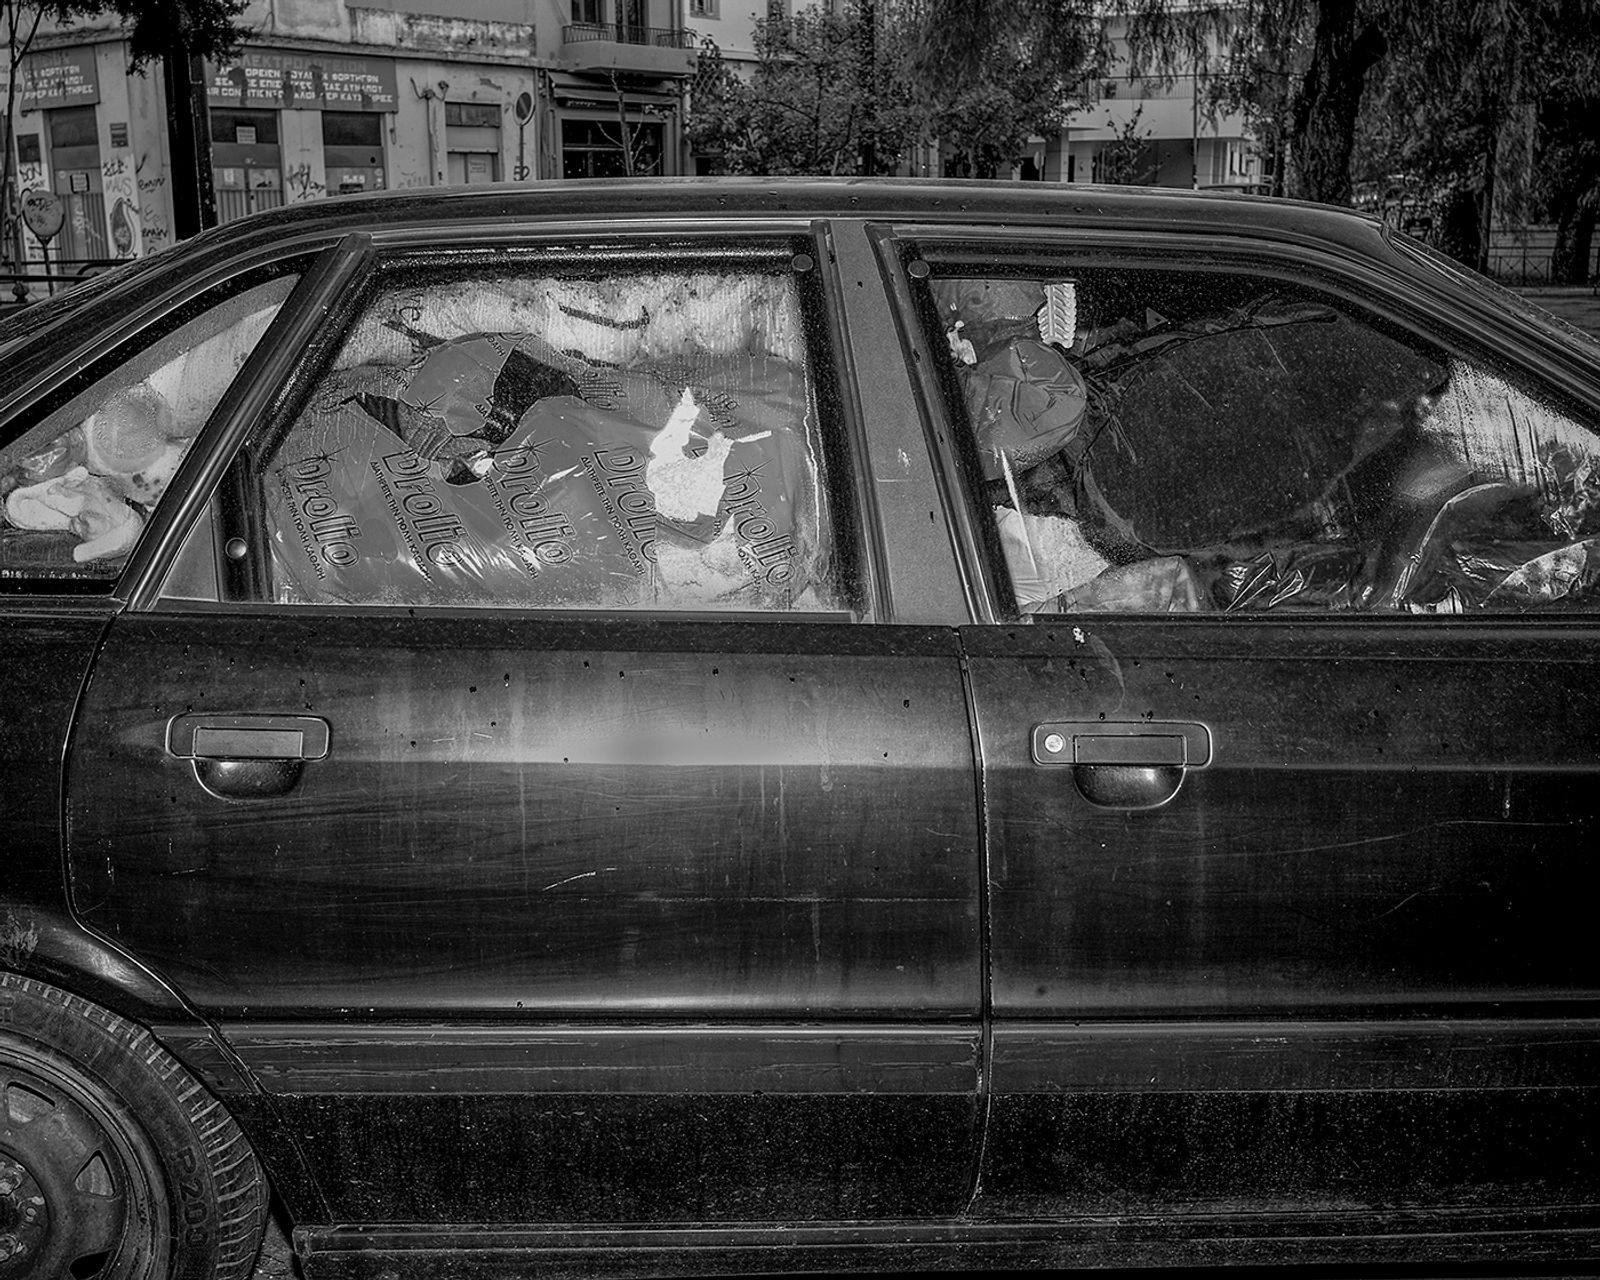 © Angelos Tzortzinis - Clothes are packed in a car which serves as shelter for a homeless man under a bridge in a ghetto area in Athens.